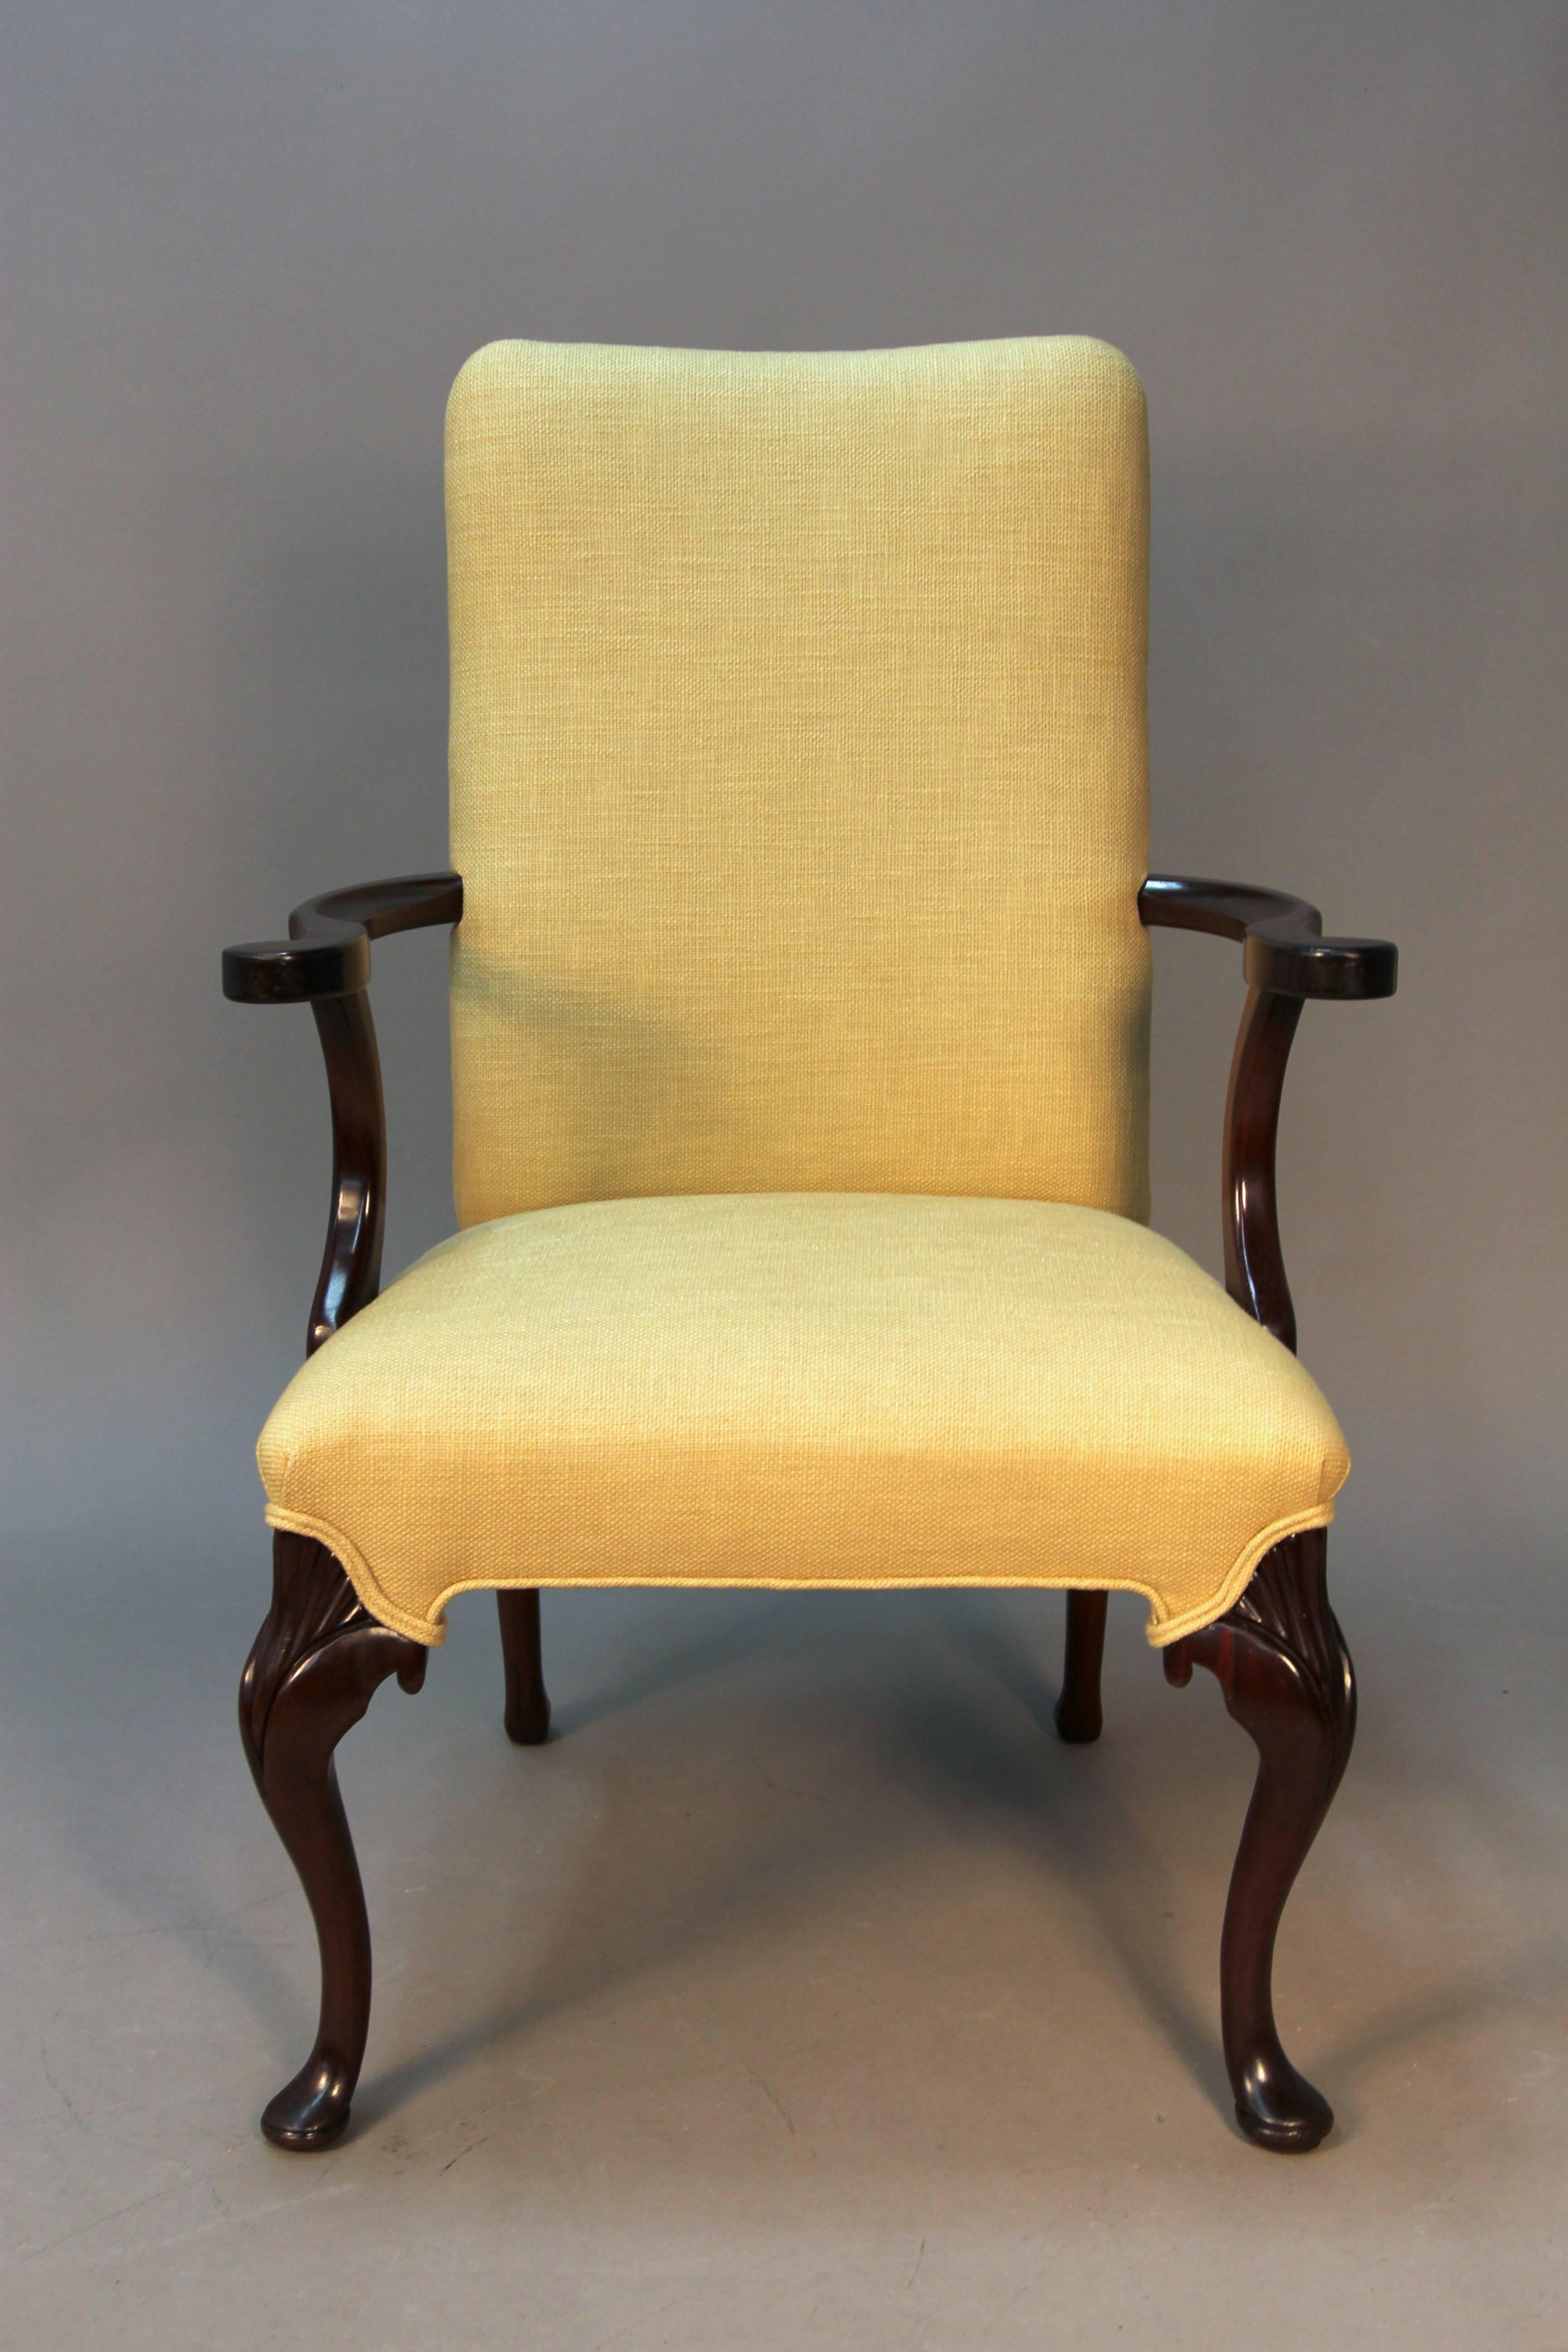 Six mahogany armchairs. Good for a conference room, library, or dining room.